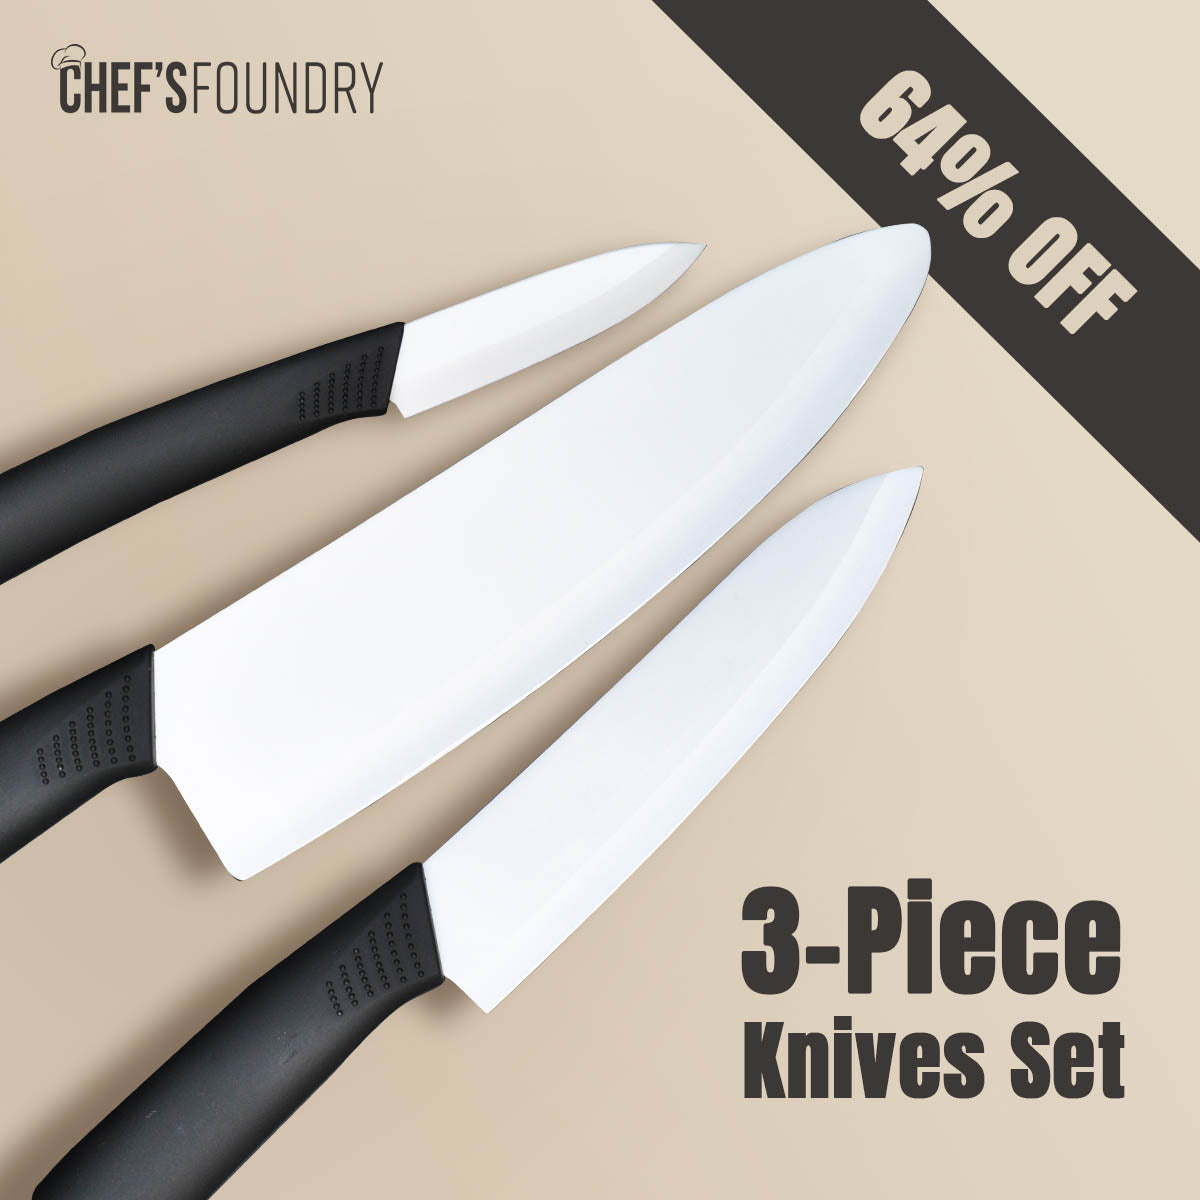 Ceramic knives in an affordable 3-pack